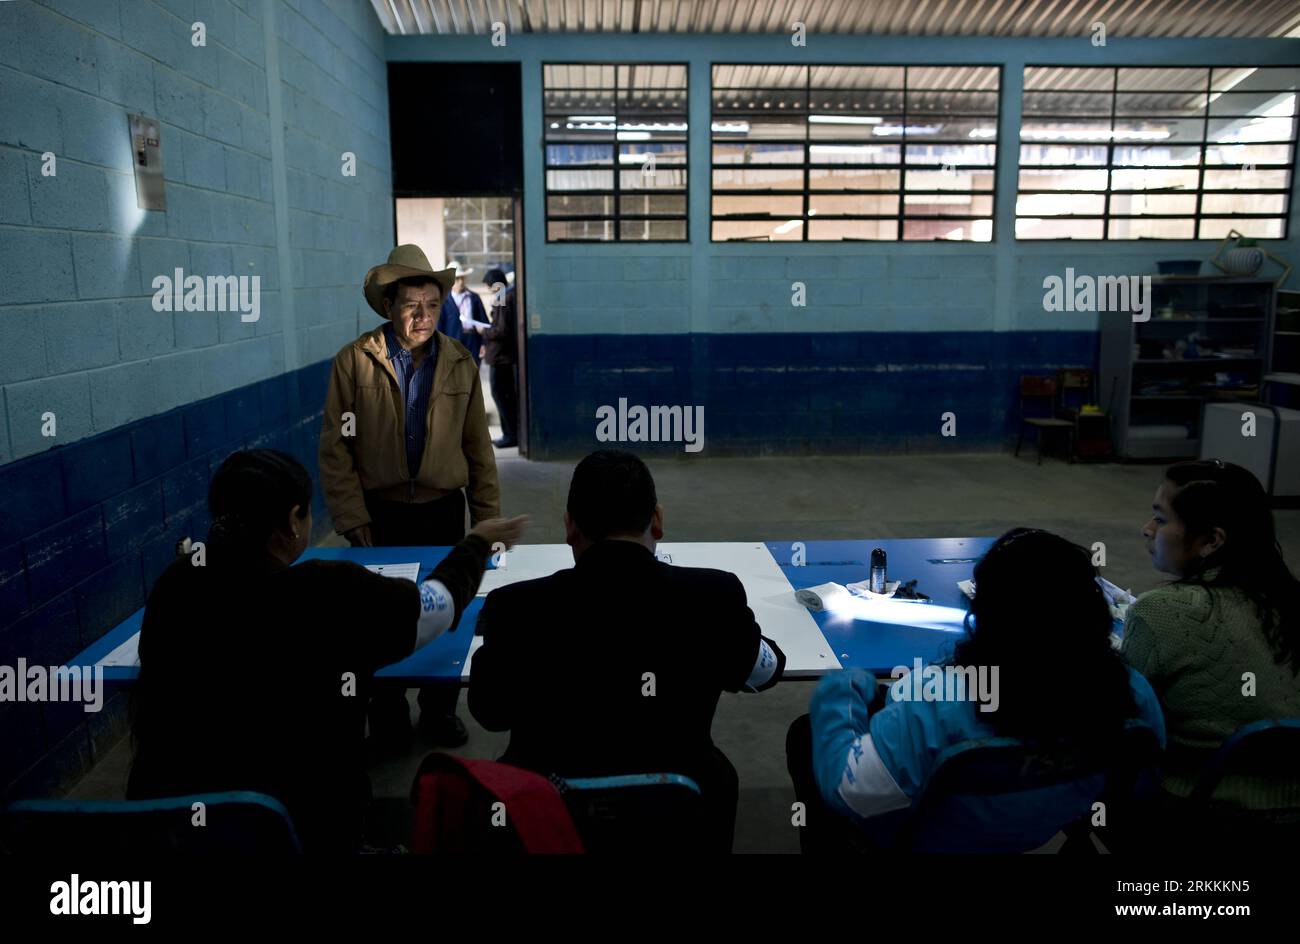 Bildnummer: 56254700  Datum: 06.11.2011  Copyright: imago/Xinhua (111107) -- SAN JUAN COMALAPA, Nov. 7, 2011 (Xinhua) -- A man goes to vote at a polling station in the province of San Juan Comalapa, in Guatemala, on Nov. 6, 2011. Guatemalans started streaming into polling stations Sunday morning to vote in their country s presidential run-off. More than 2,500 polling stations across the Central American country opened their doors at 7 a.m. (1300 GMT) for the election, a follow-up to the first round in September. (Xinhua/Guillermo Arias) (py) (srb) GUATEMALA-SAN JUAN COMALAPA-PESIDENTIAL ELECTI Stock Photo